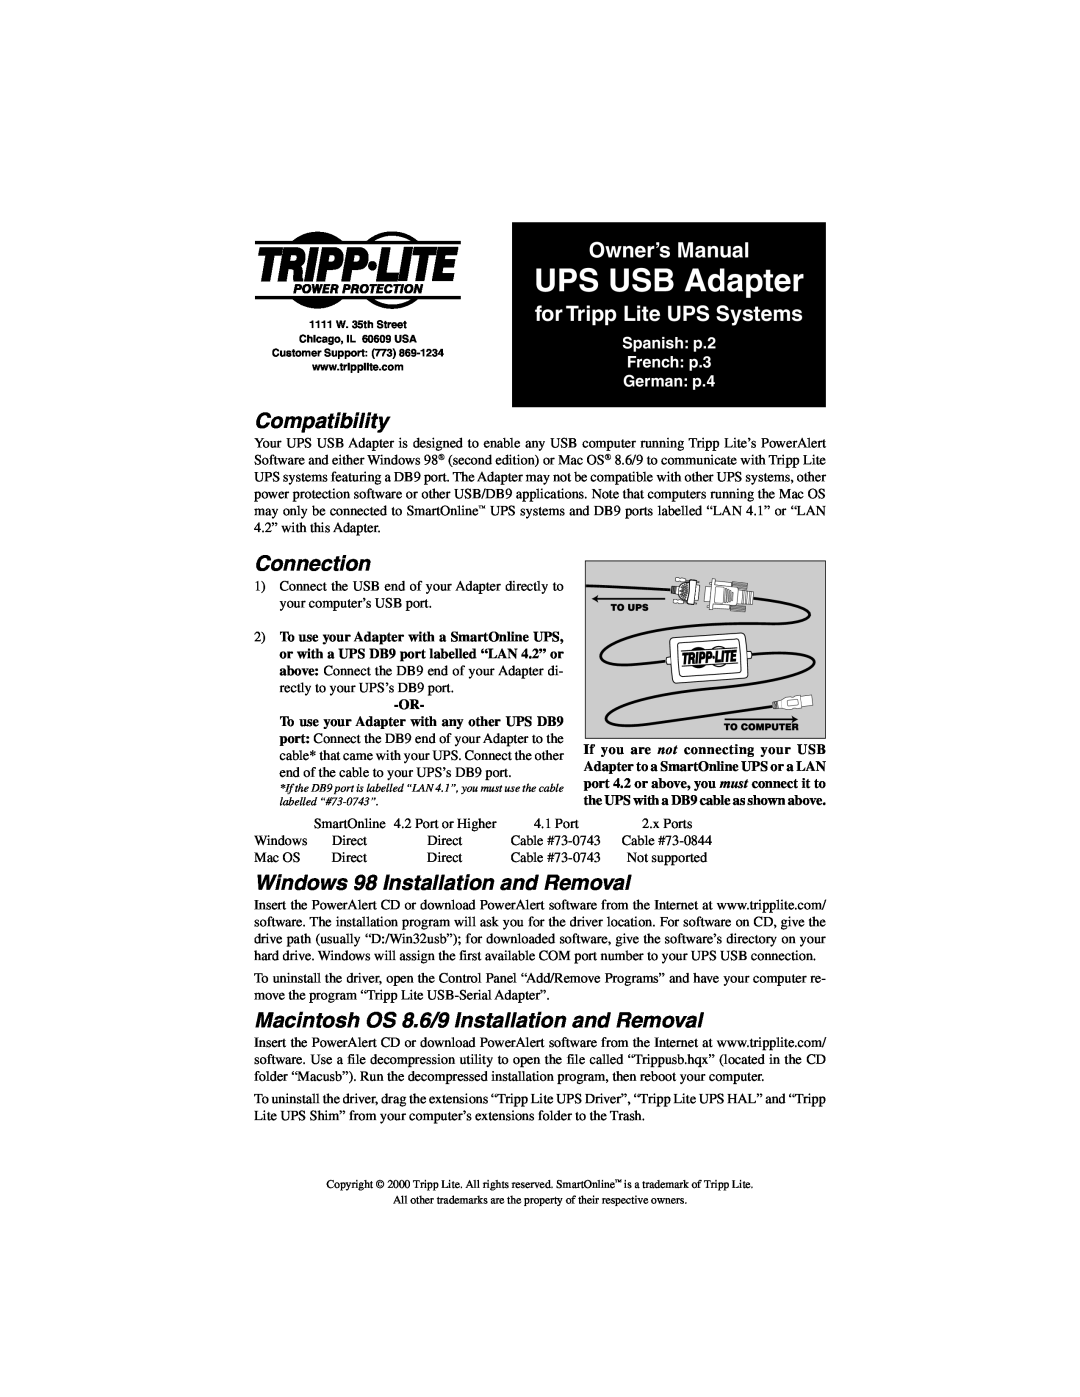 Tripp Lite UPS USB Adapter owner manual for Tripp Lite UPS Systems, Compatibility, Connection 